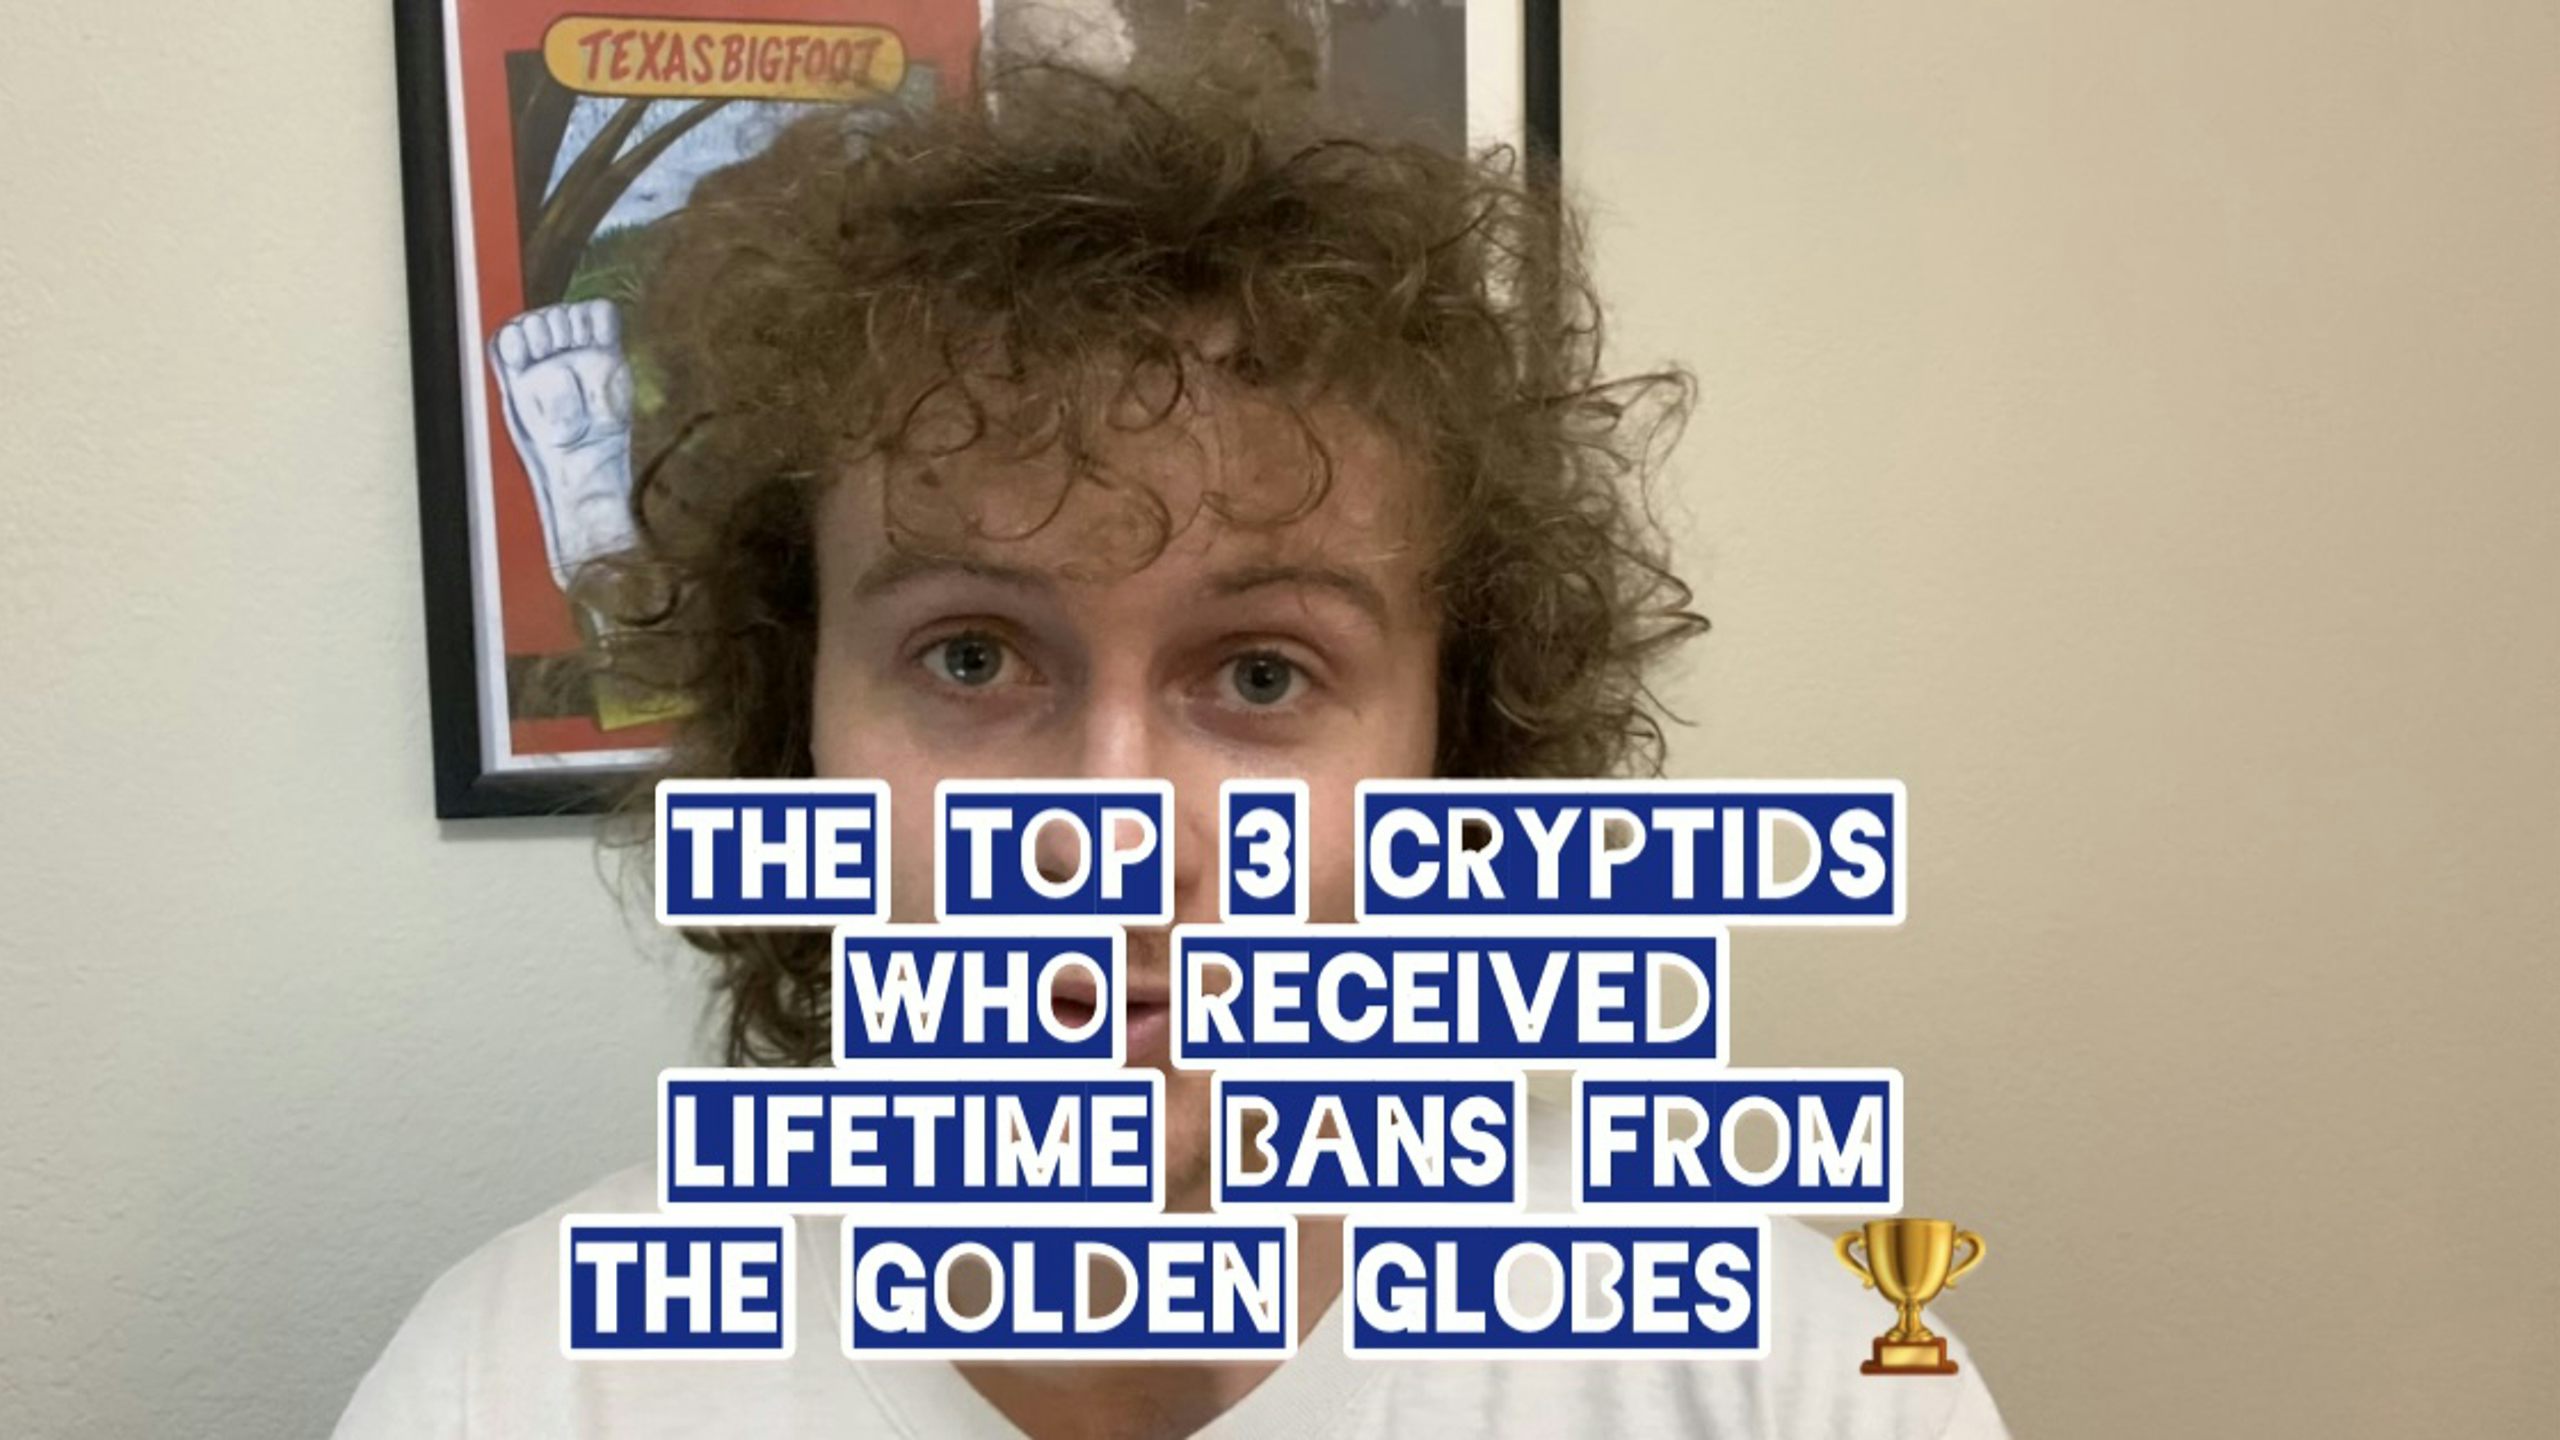 Top 3 Cryptids Who Received Lifetime Bans From the Golden Globes